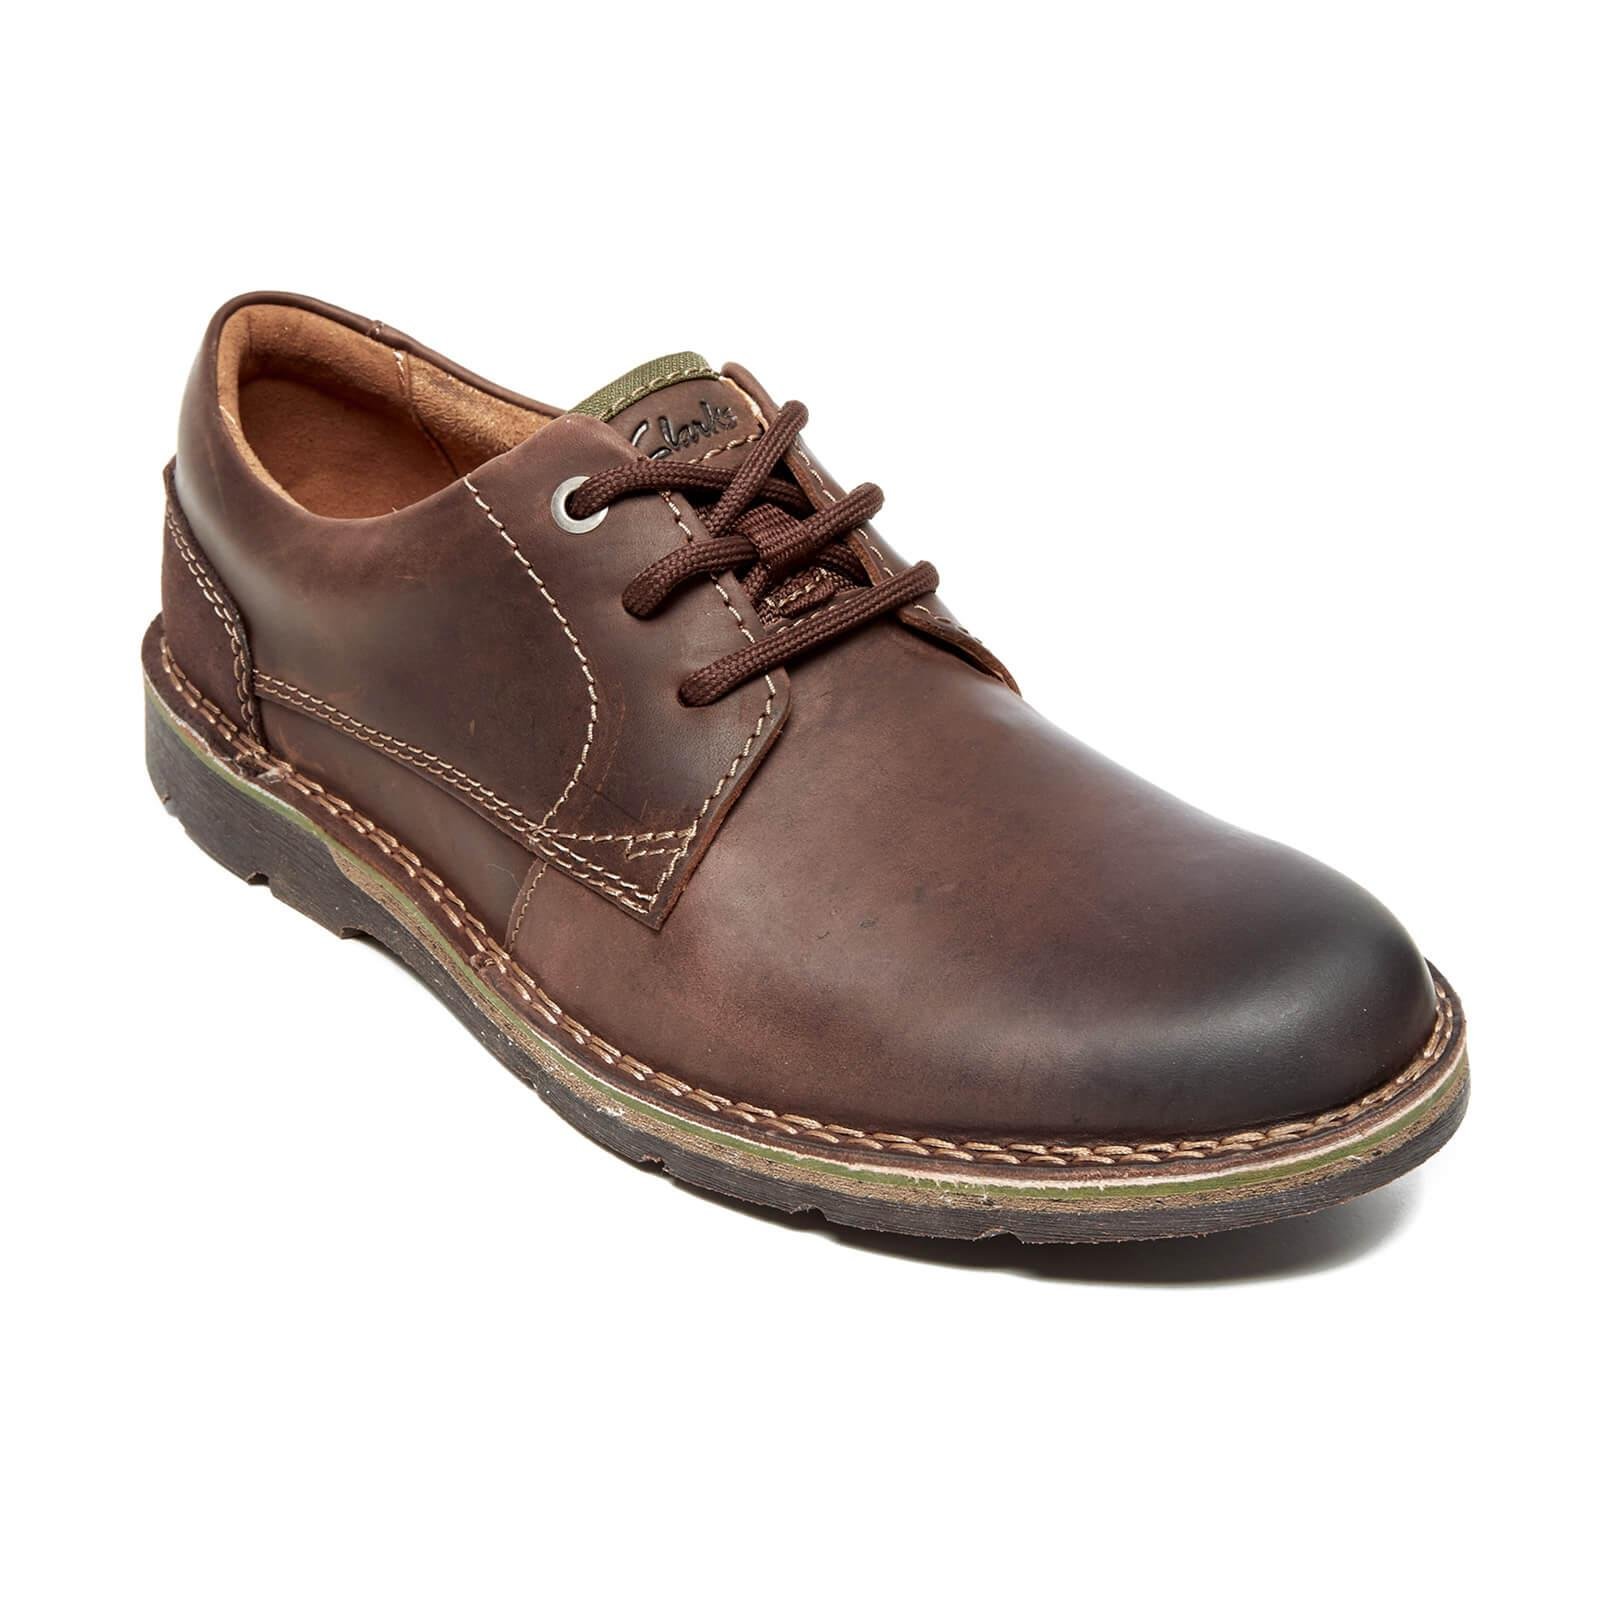 Clarks Edgewick Plain Leather Shoes in Brown for Men - Lyst